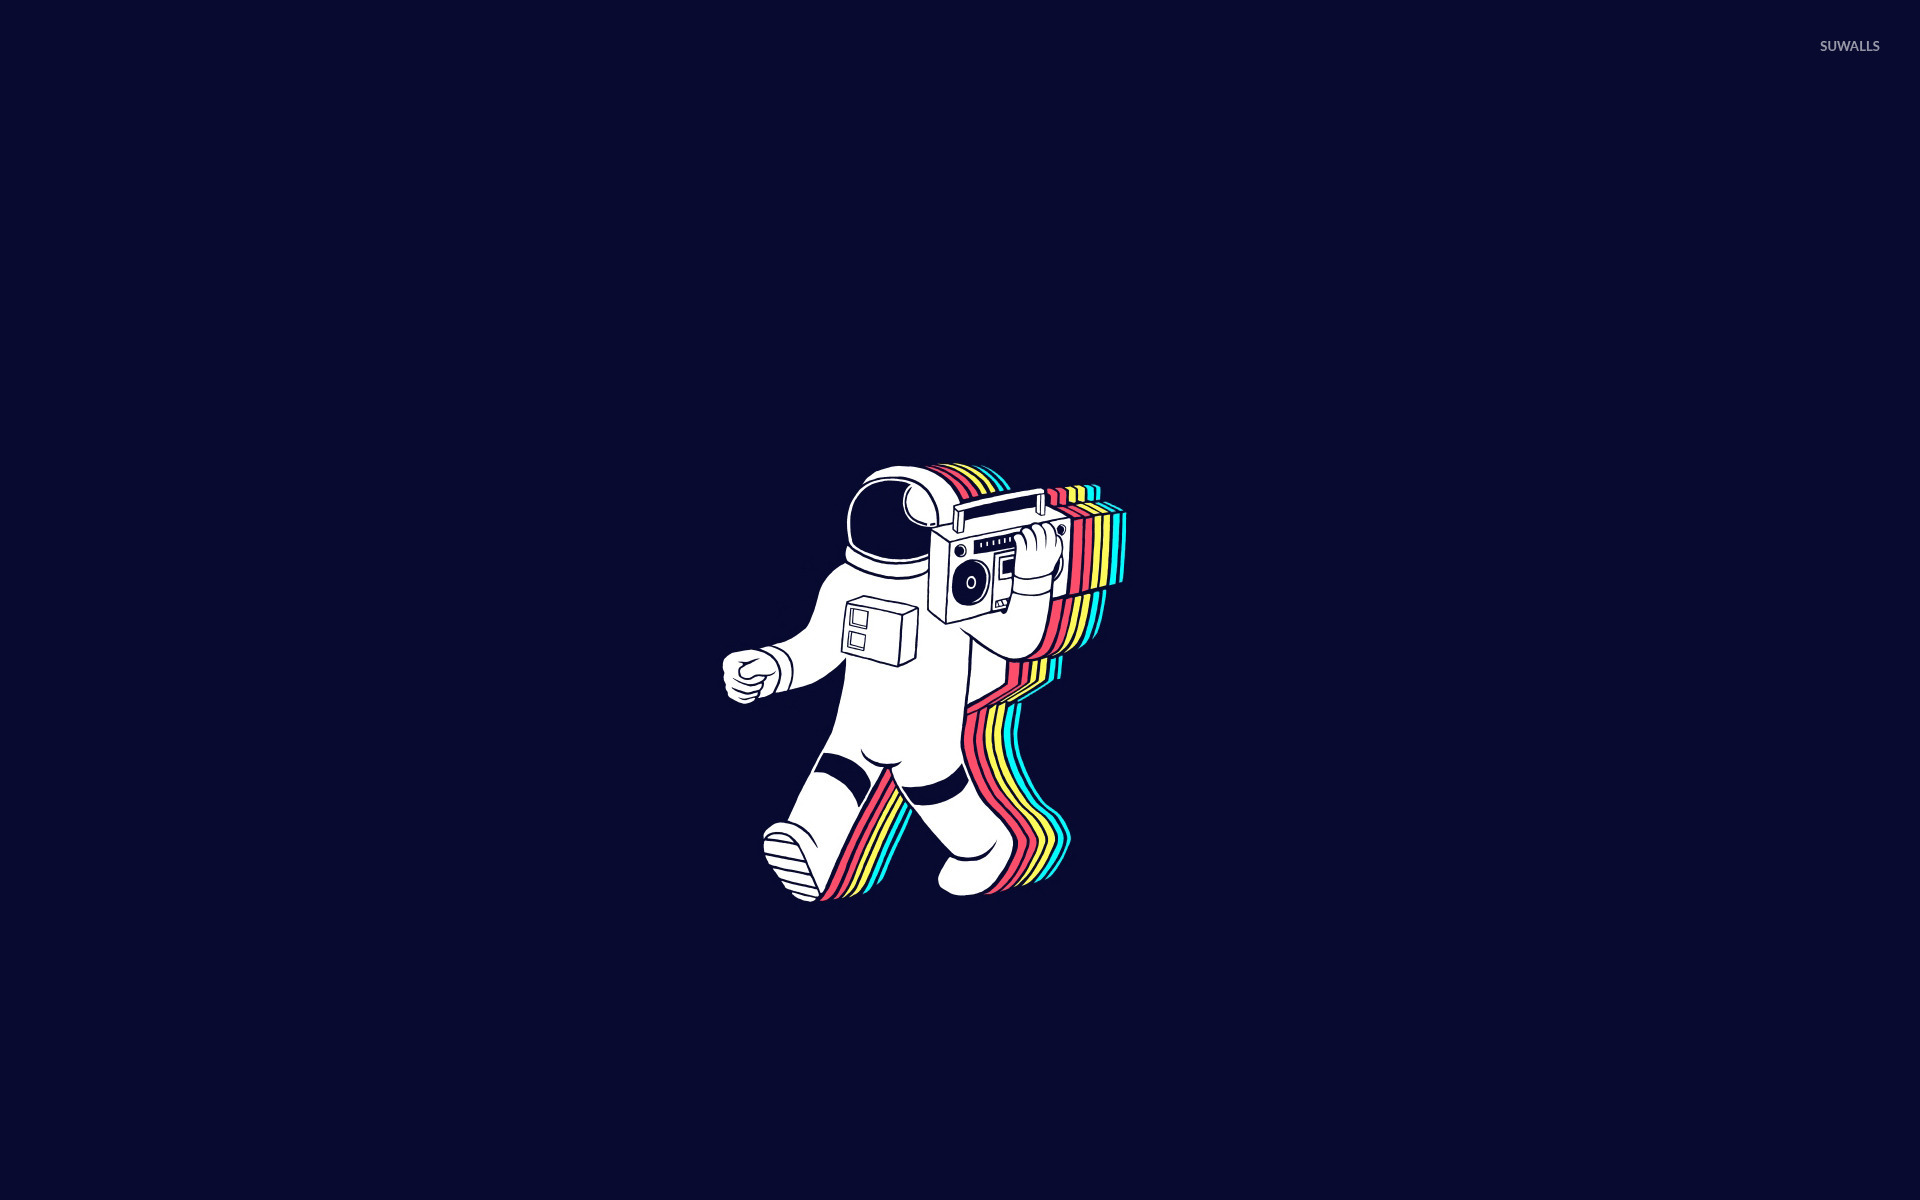 Party astronaut wallpaper   Music wallpapers   15899